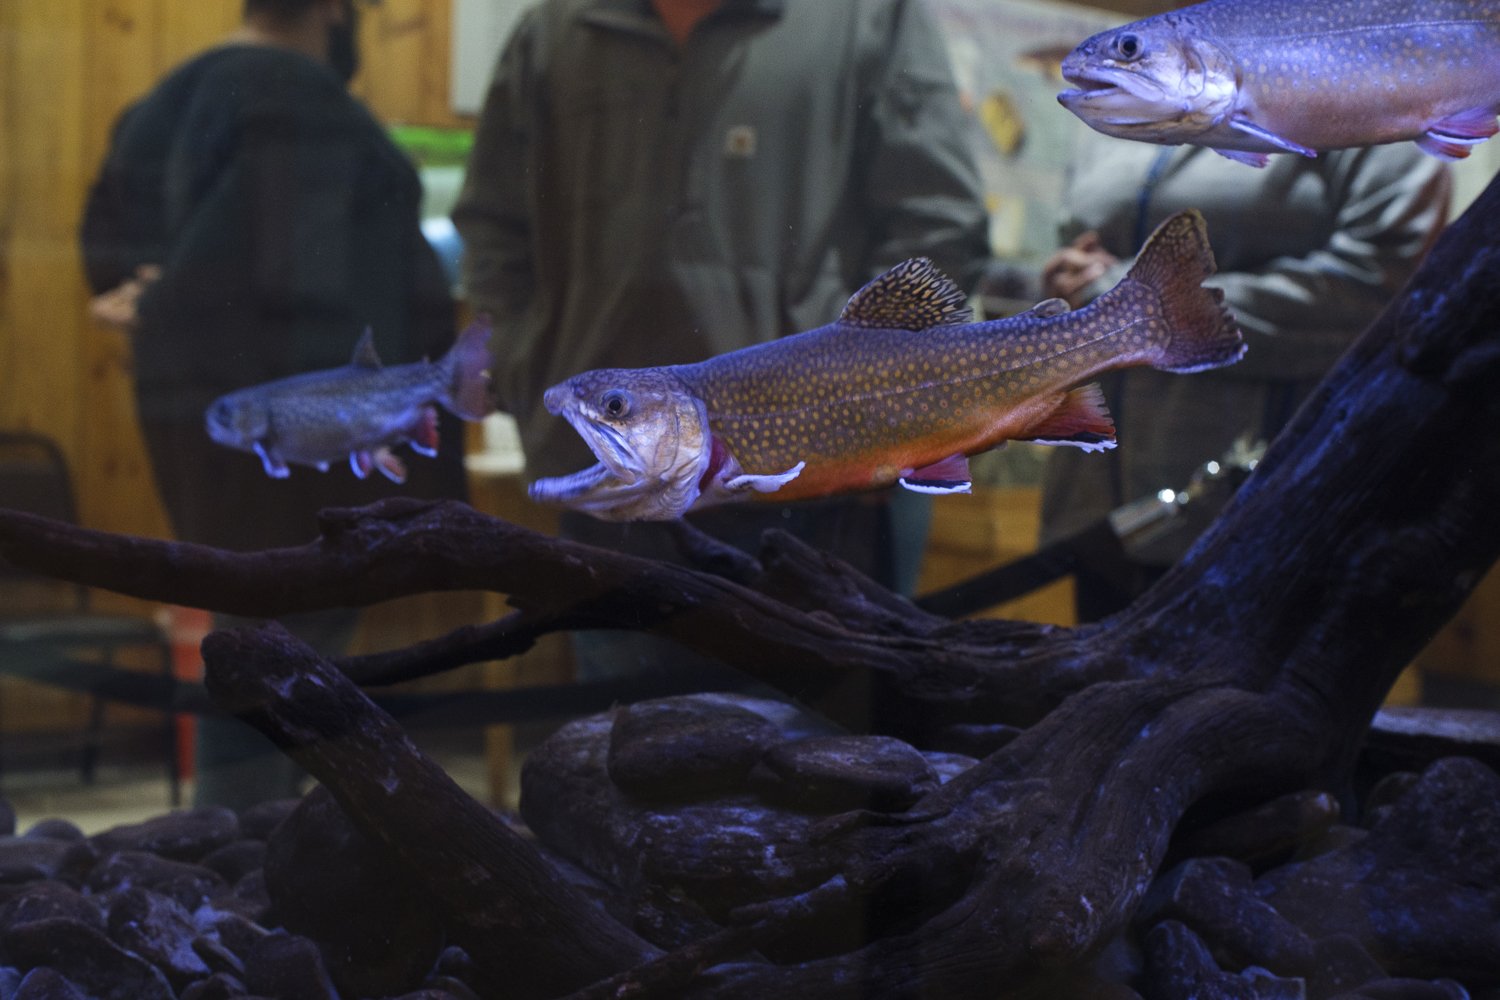  Trout, as seen in an aquarium, at the Salmon River Fish Hatchery.  